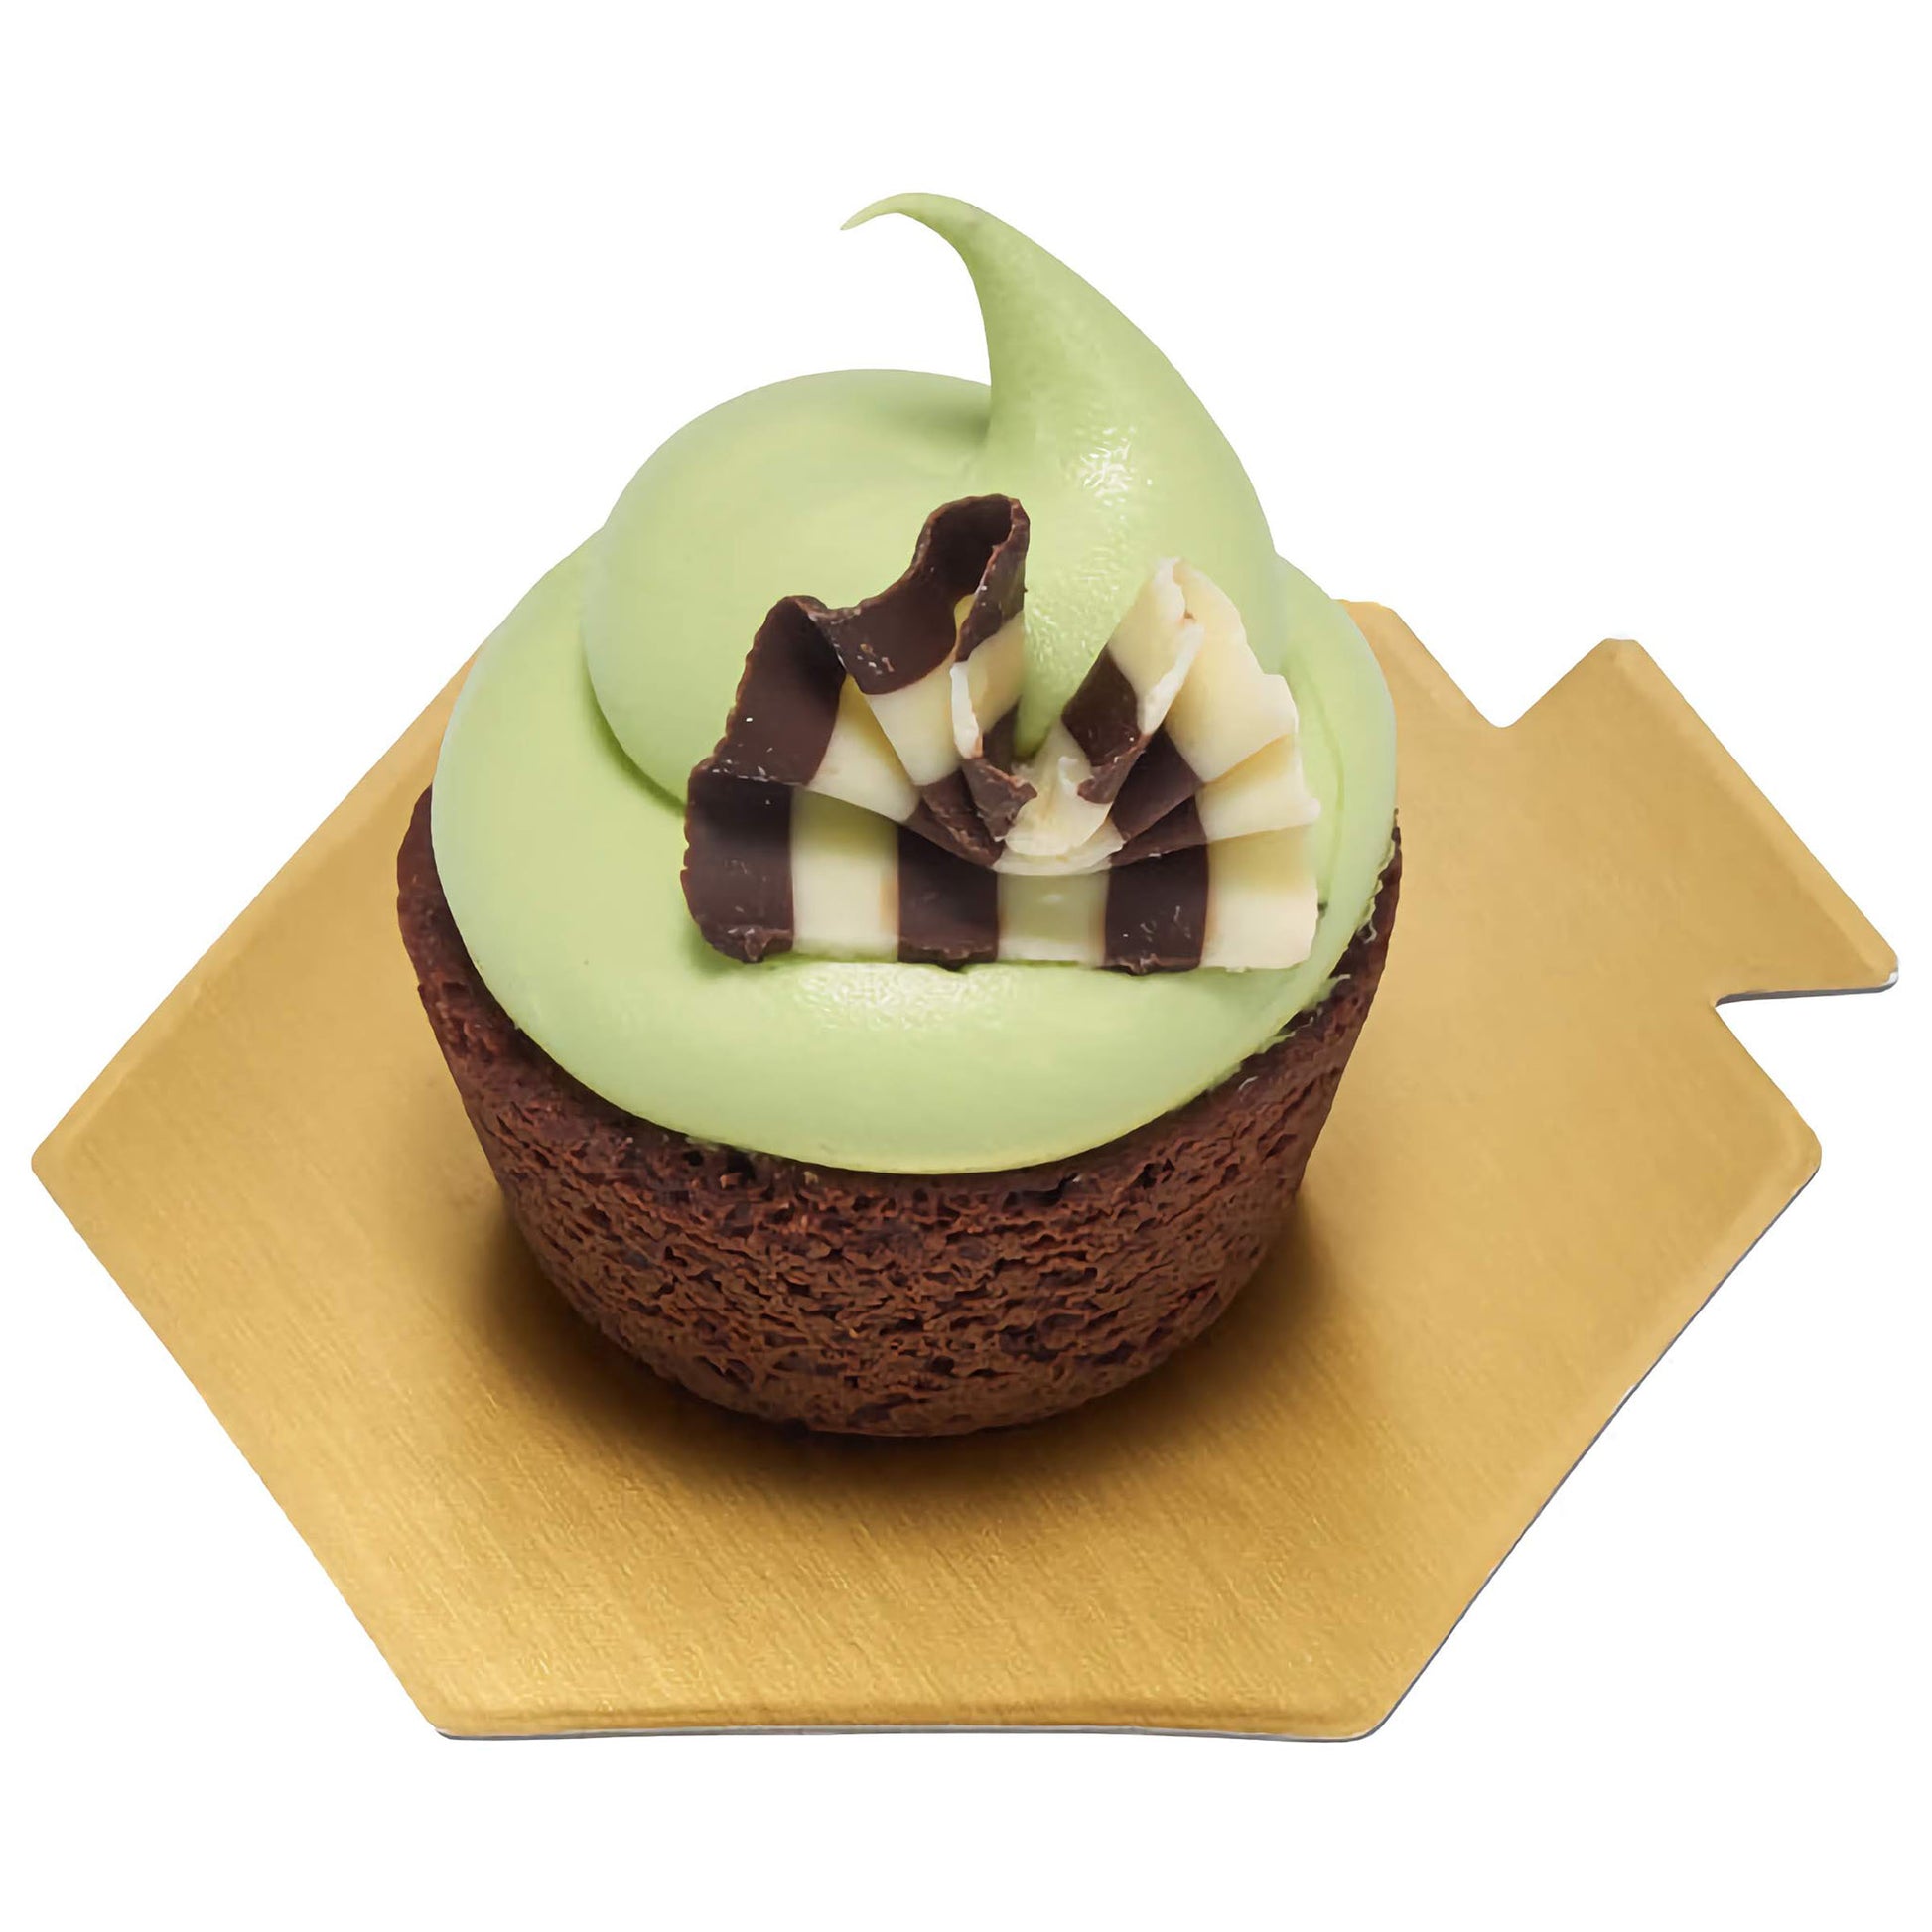 Gourmet mini forest dark and white Belgian chocolate shavings on a chocolate cupcake topped with vibrant green frosting, suitable for festive and deluxe dessert menus.